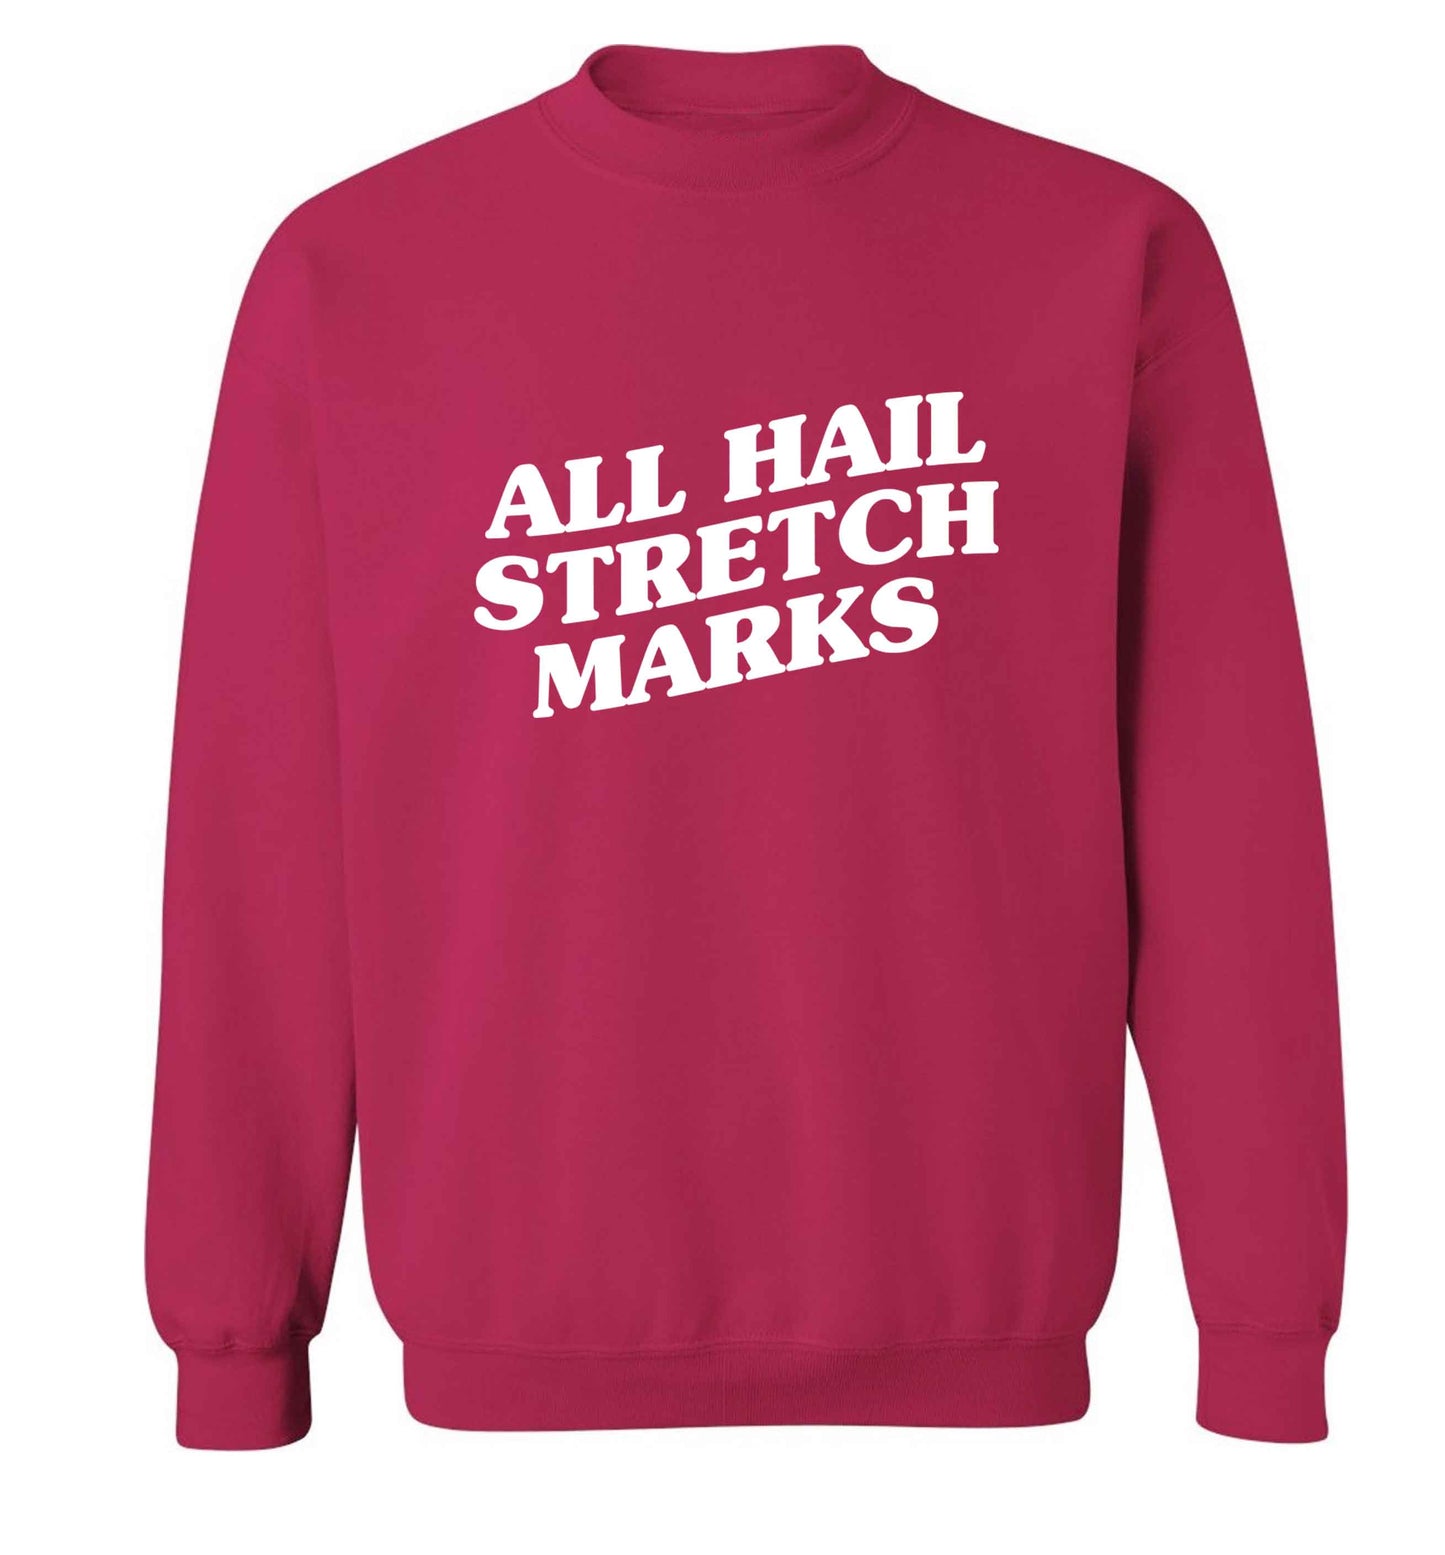 All hail stretch marks adult's unisex pink sweater 2XL